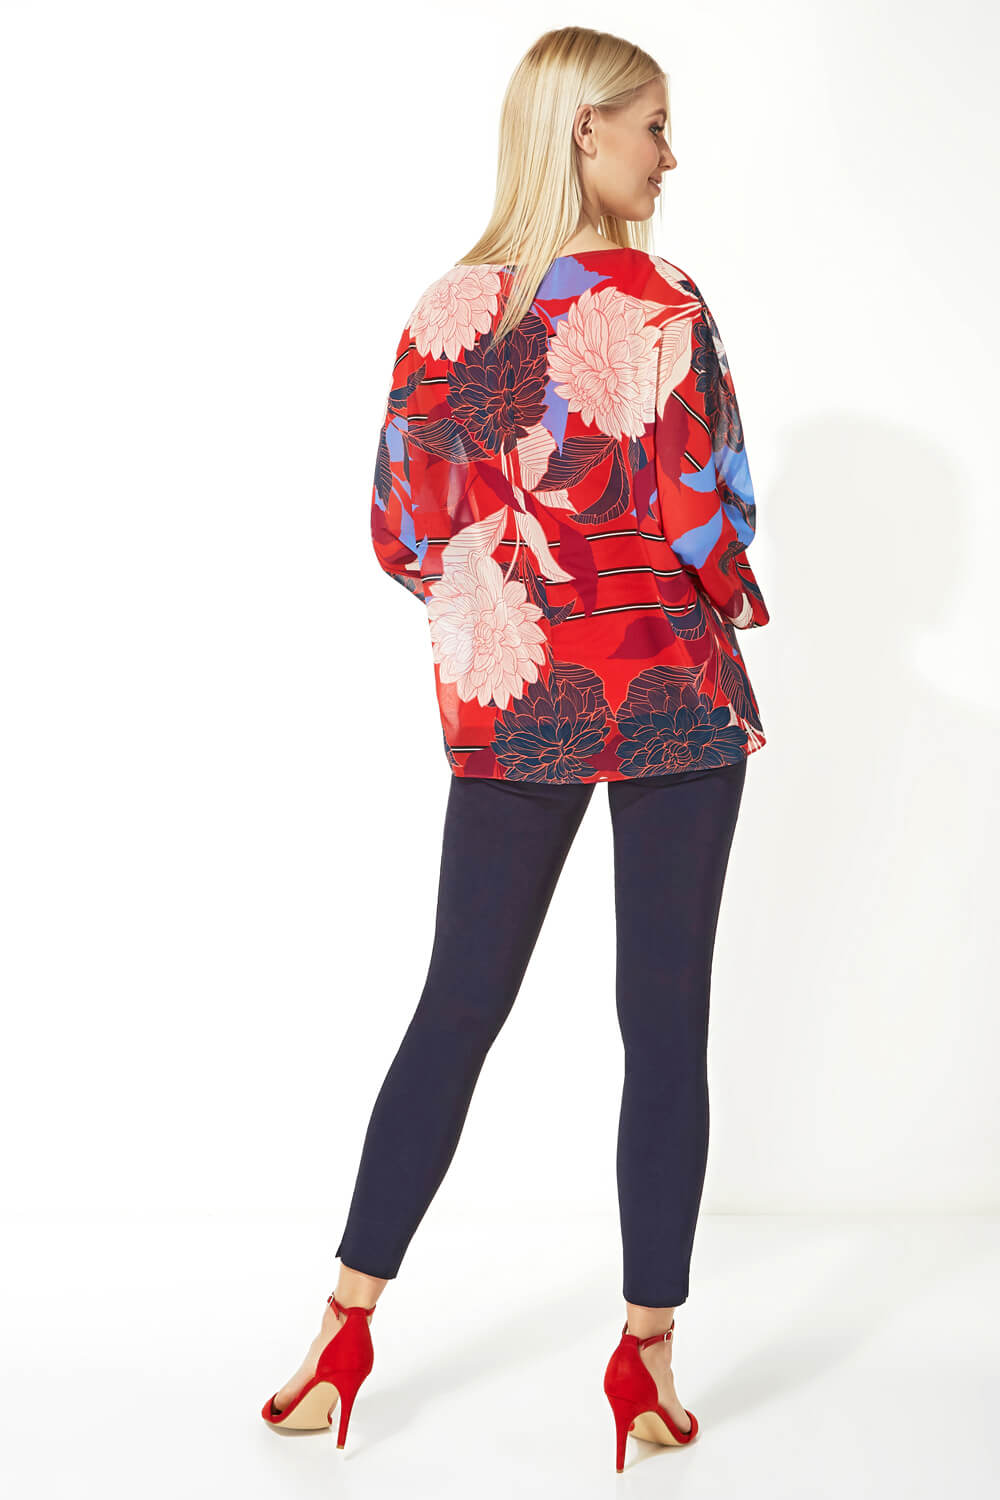 Red Floral Overlay Chiffon Top, Image 3 of 5